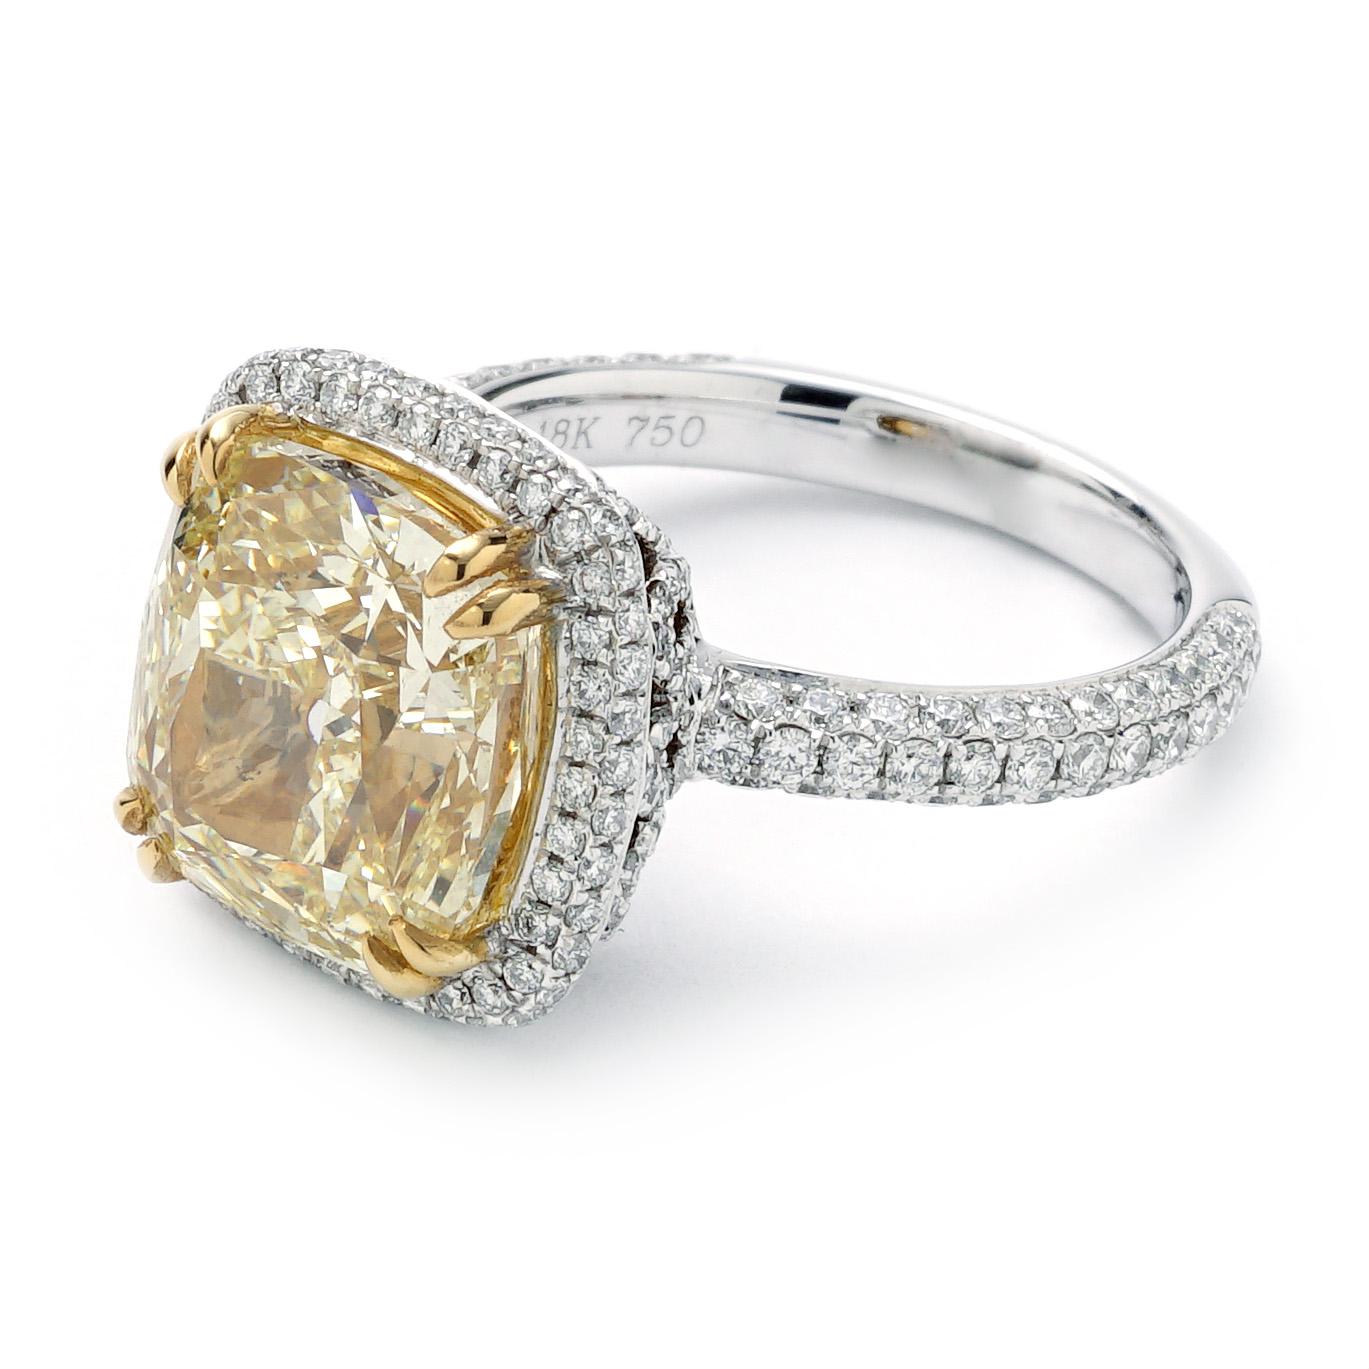 This Cushion pave Halo ring weighs 5.4 DWT (approx. 8.4 grams). It contains one GIA Certified cushion shaped fancy yellow, VS2 clarity diamond weighing 7.01 CTTW, 236 round G color and VS2-SI1 clarity diamonds weighing 1.11 CTTW. Ring is Size 6